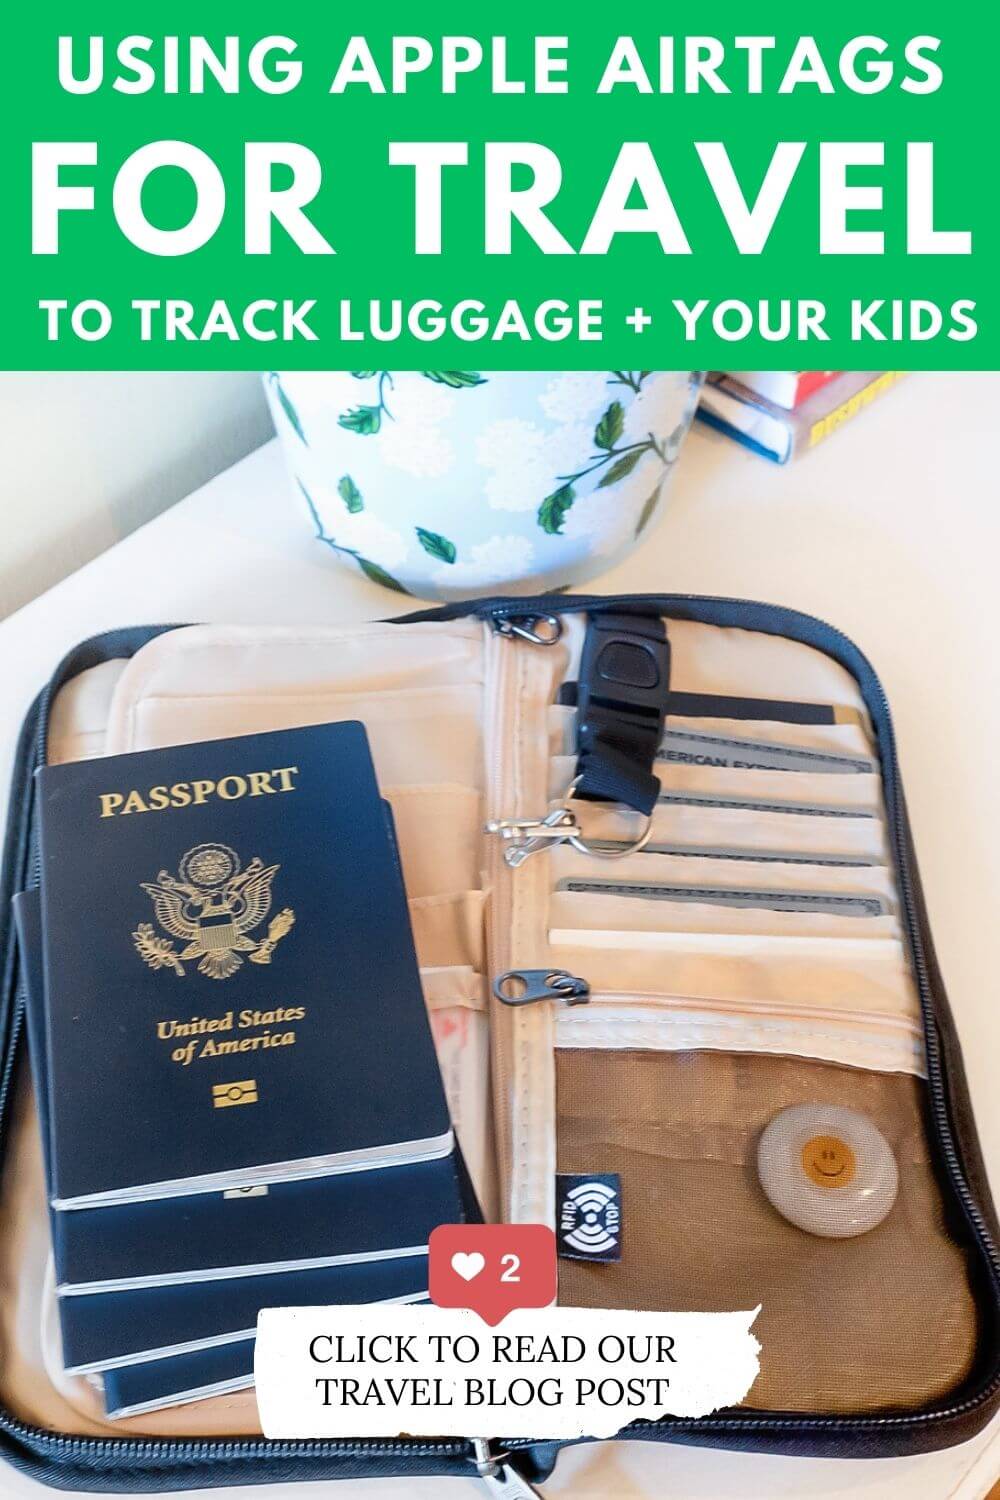 Using AirTags for Travel Tracking